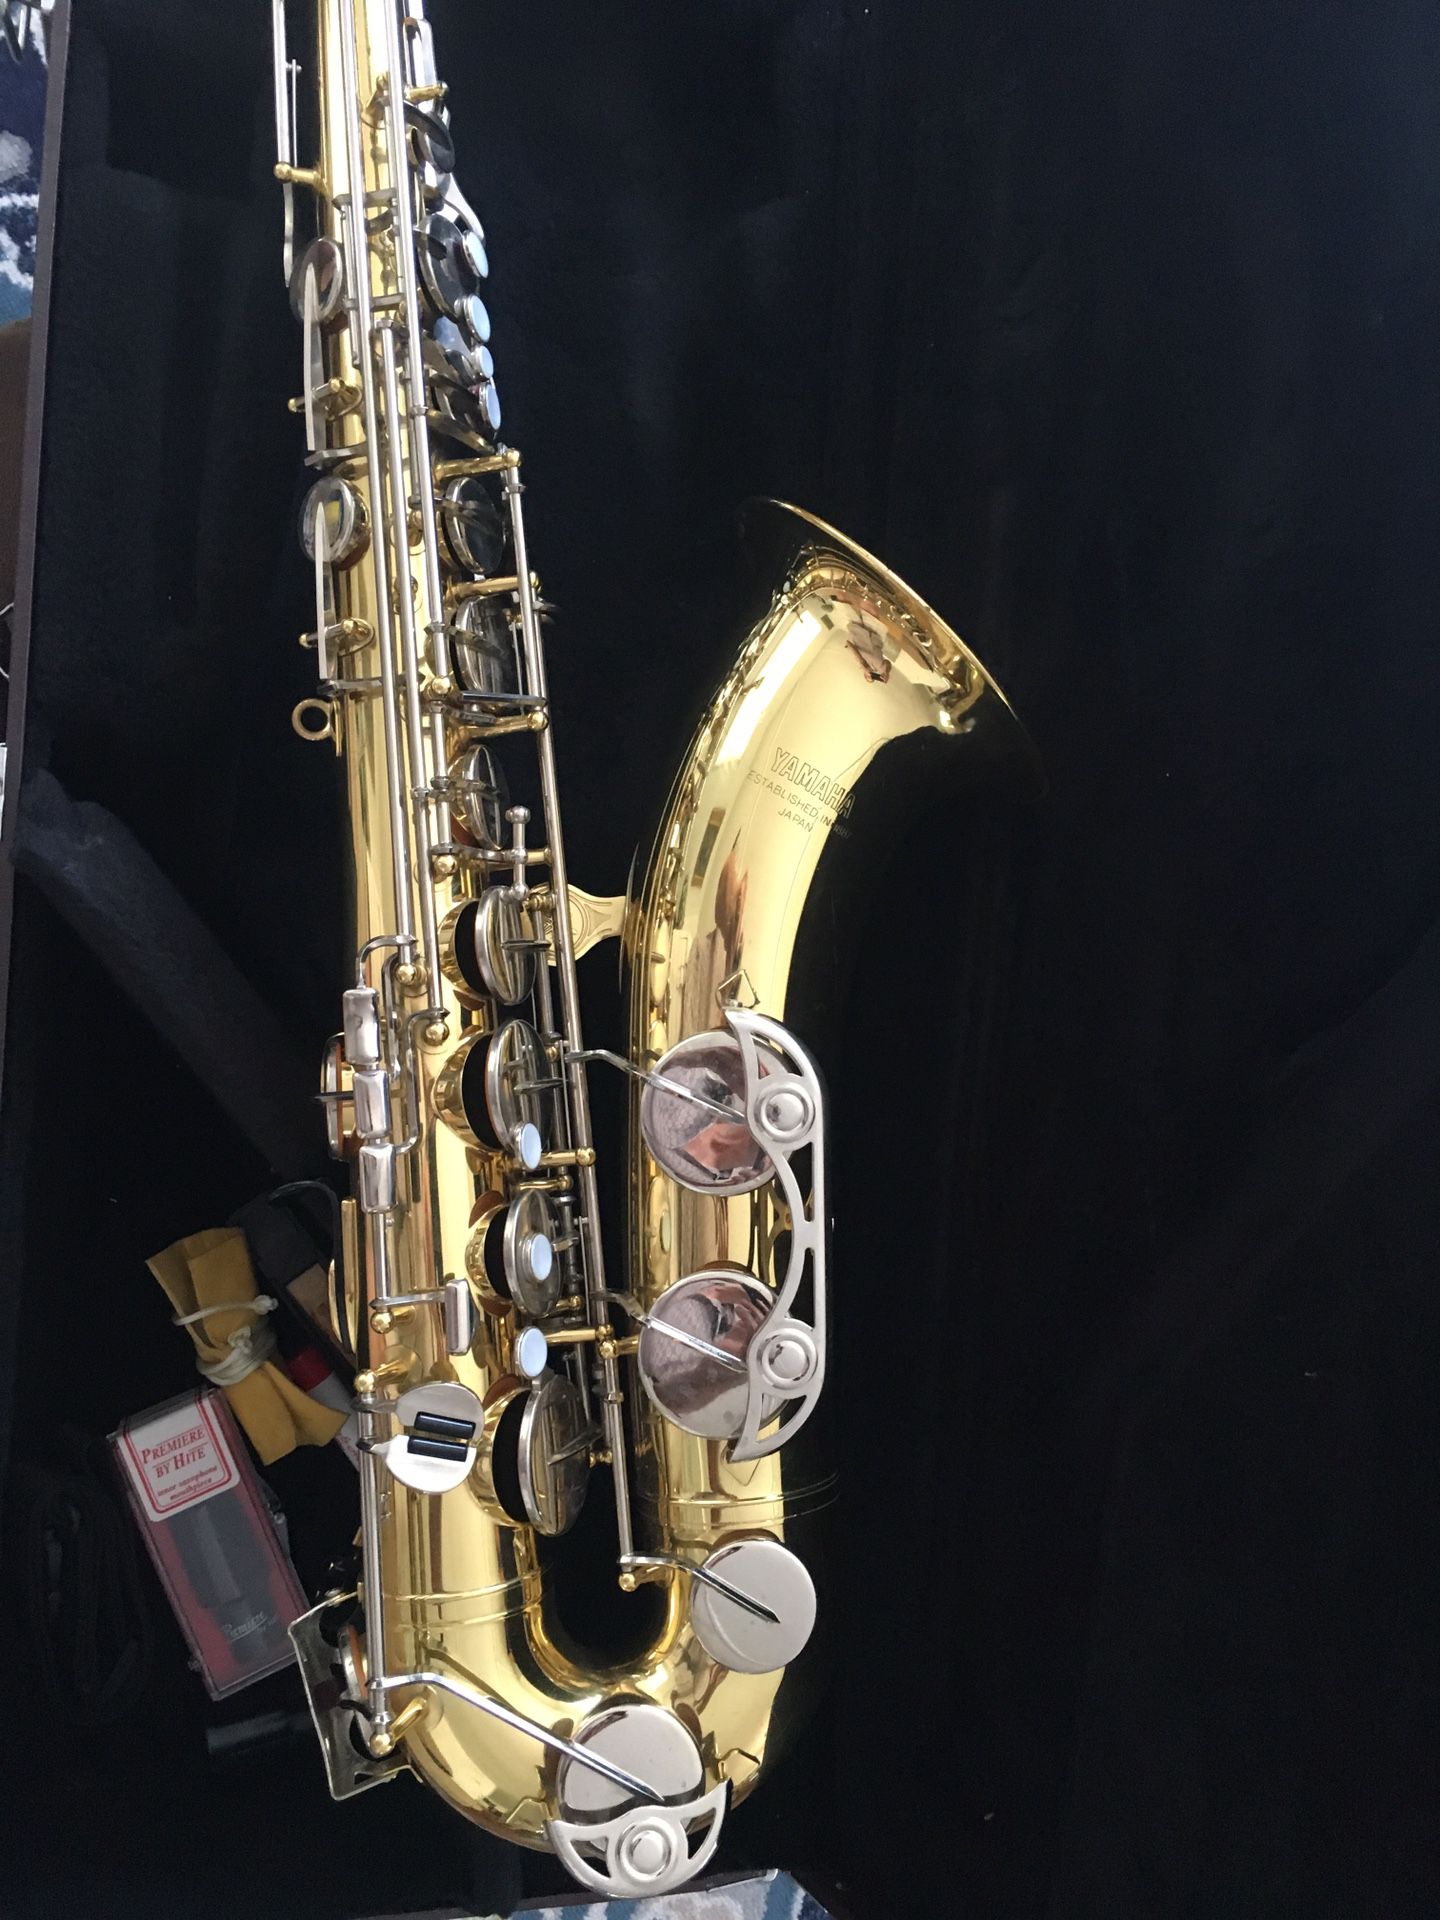 Yamaha tenor saxophone ready to play comes with one year free service